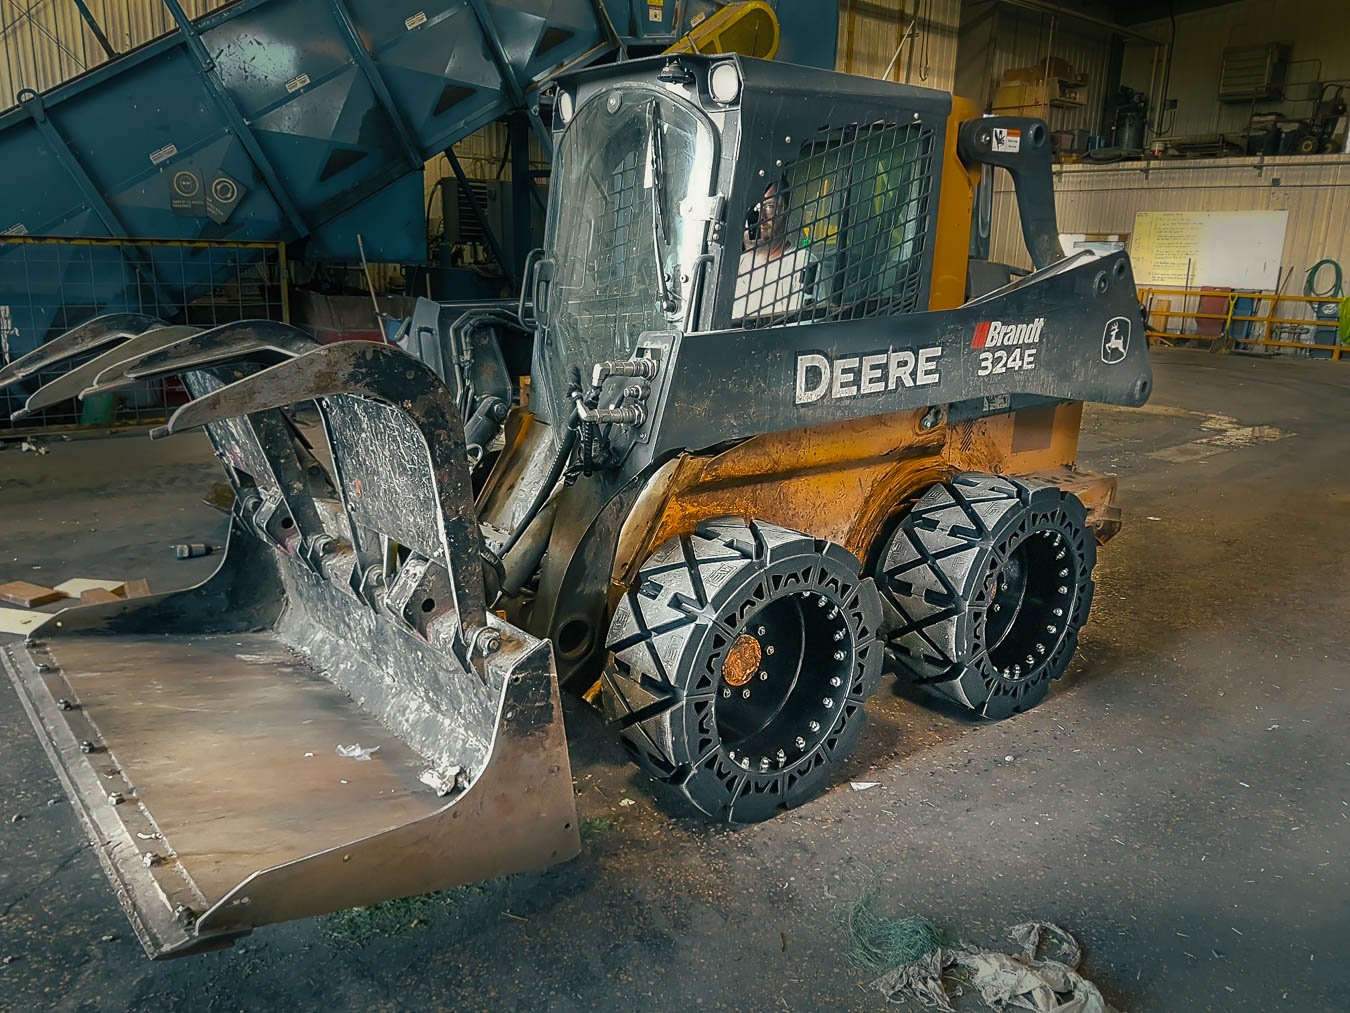 This image shows a DEERE 324E with our flat free skid steer tires the EWRS-HS